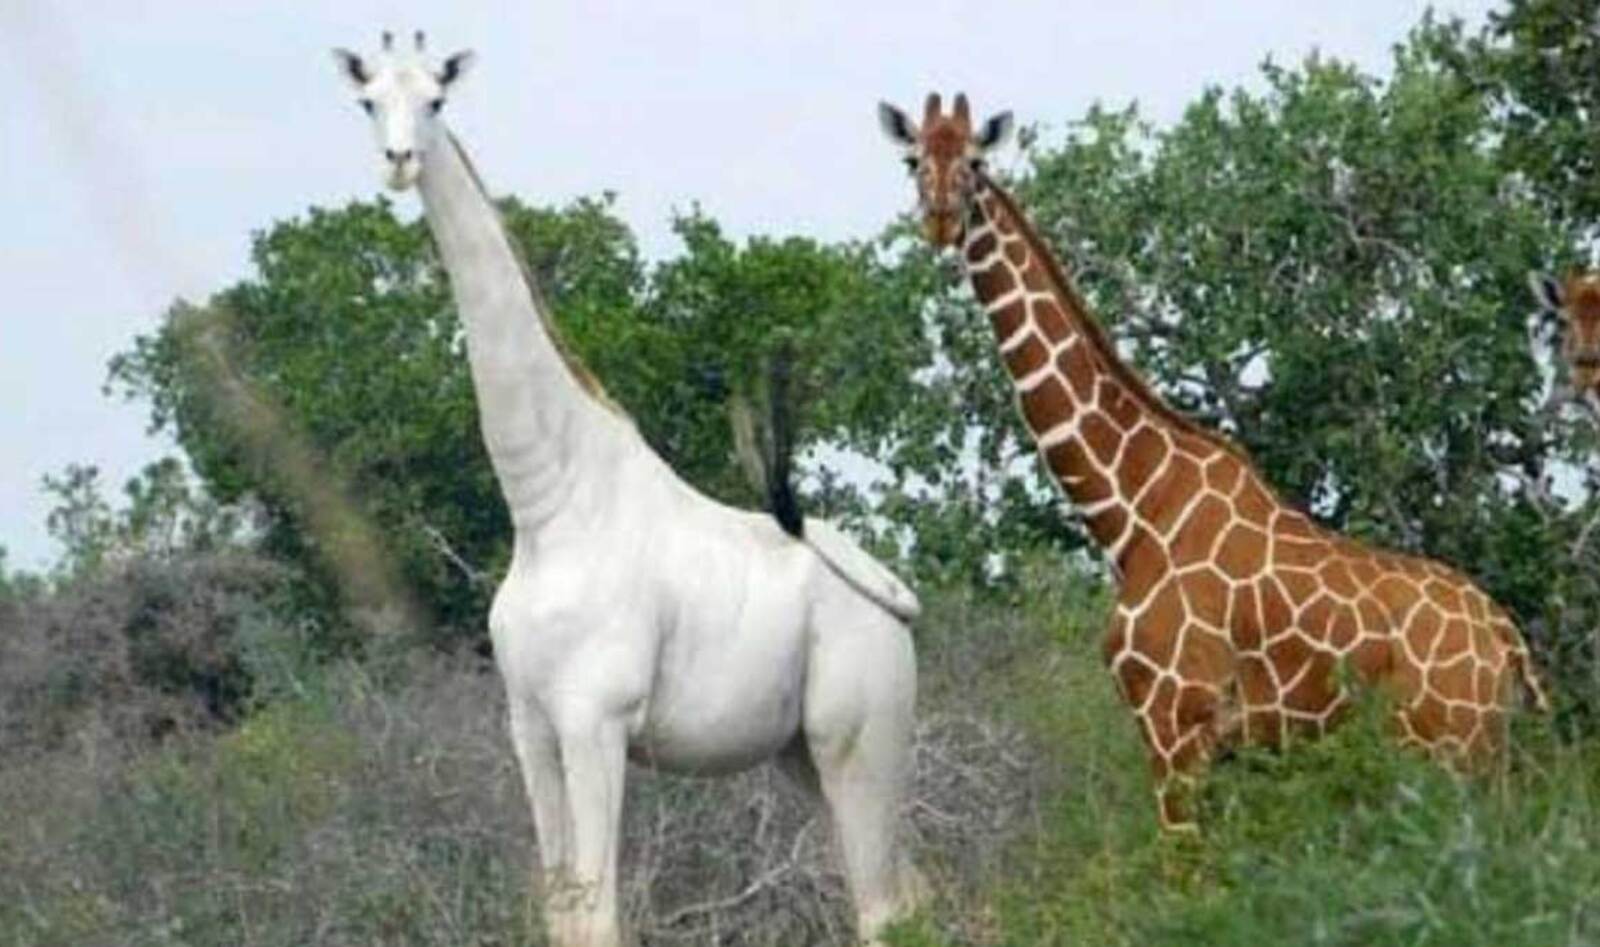 Poachers Kill Two Rare White Giraffes, Only One Now Left in the Wild